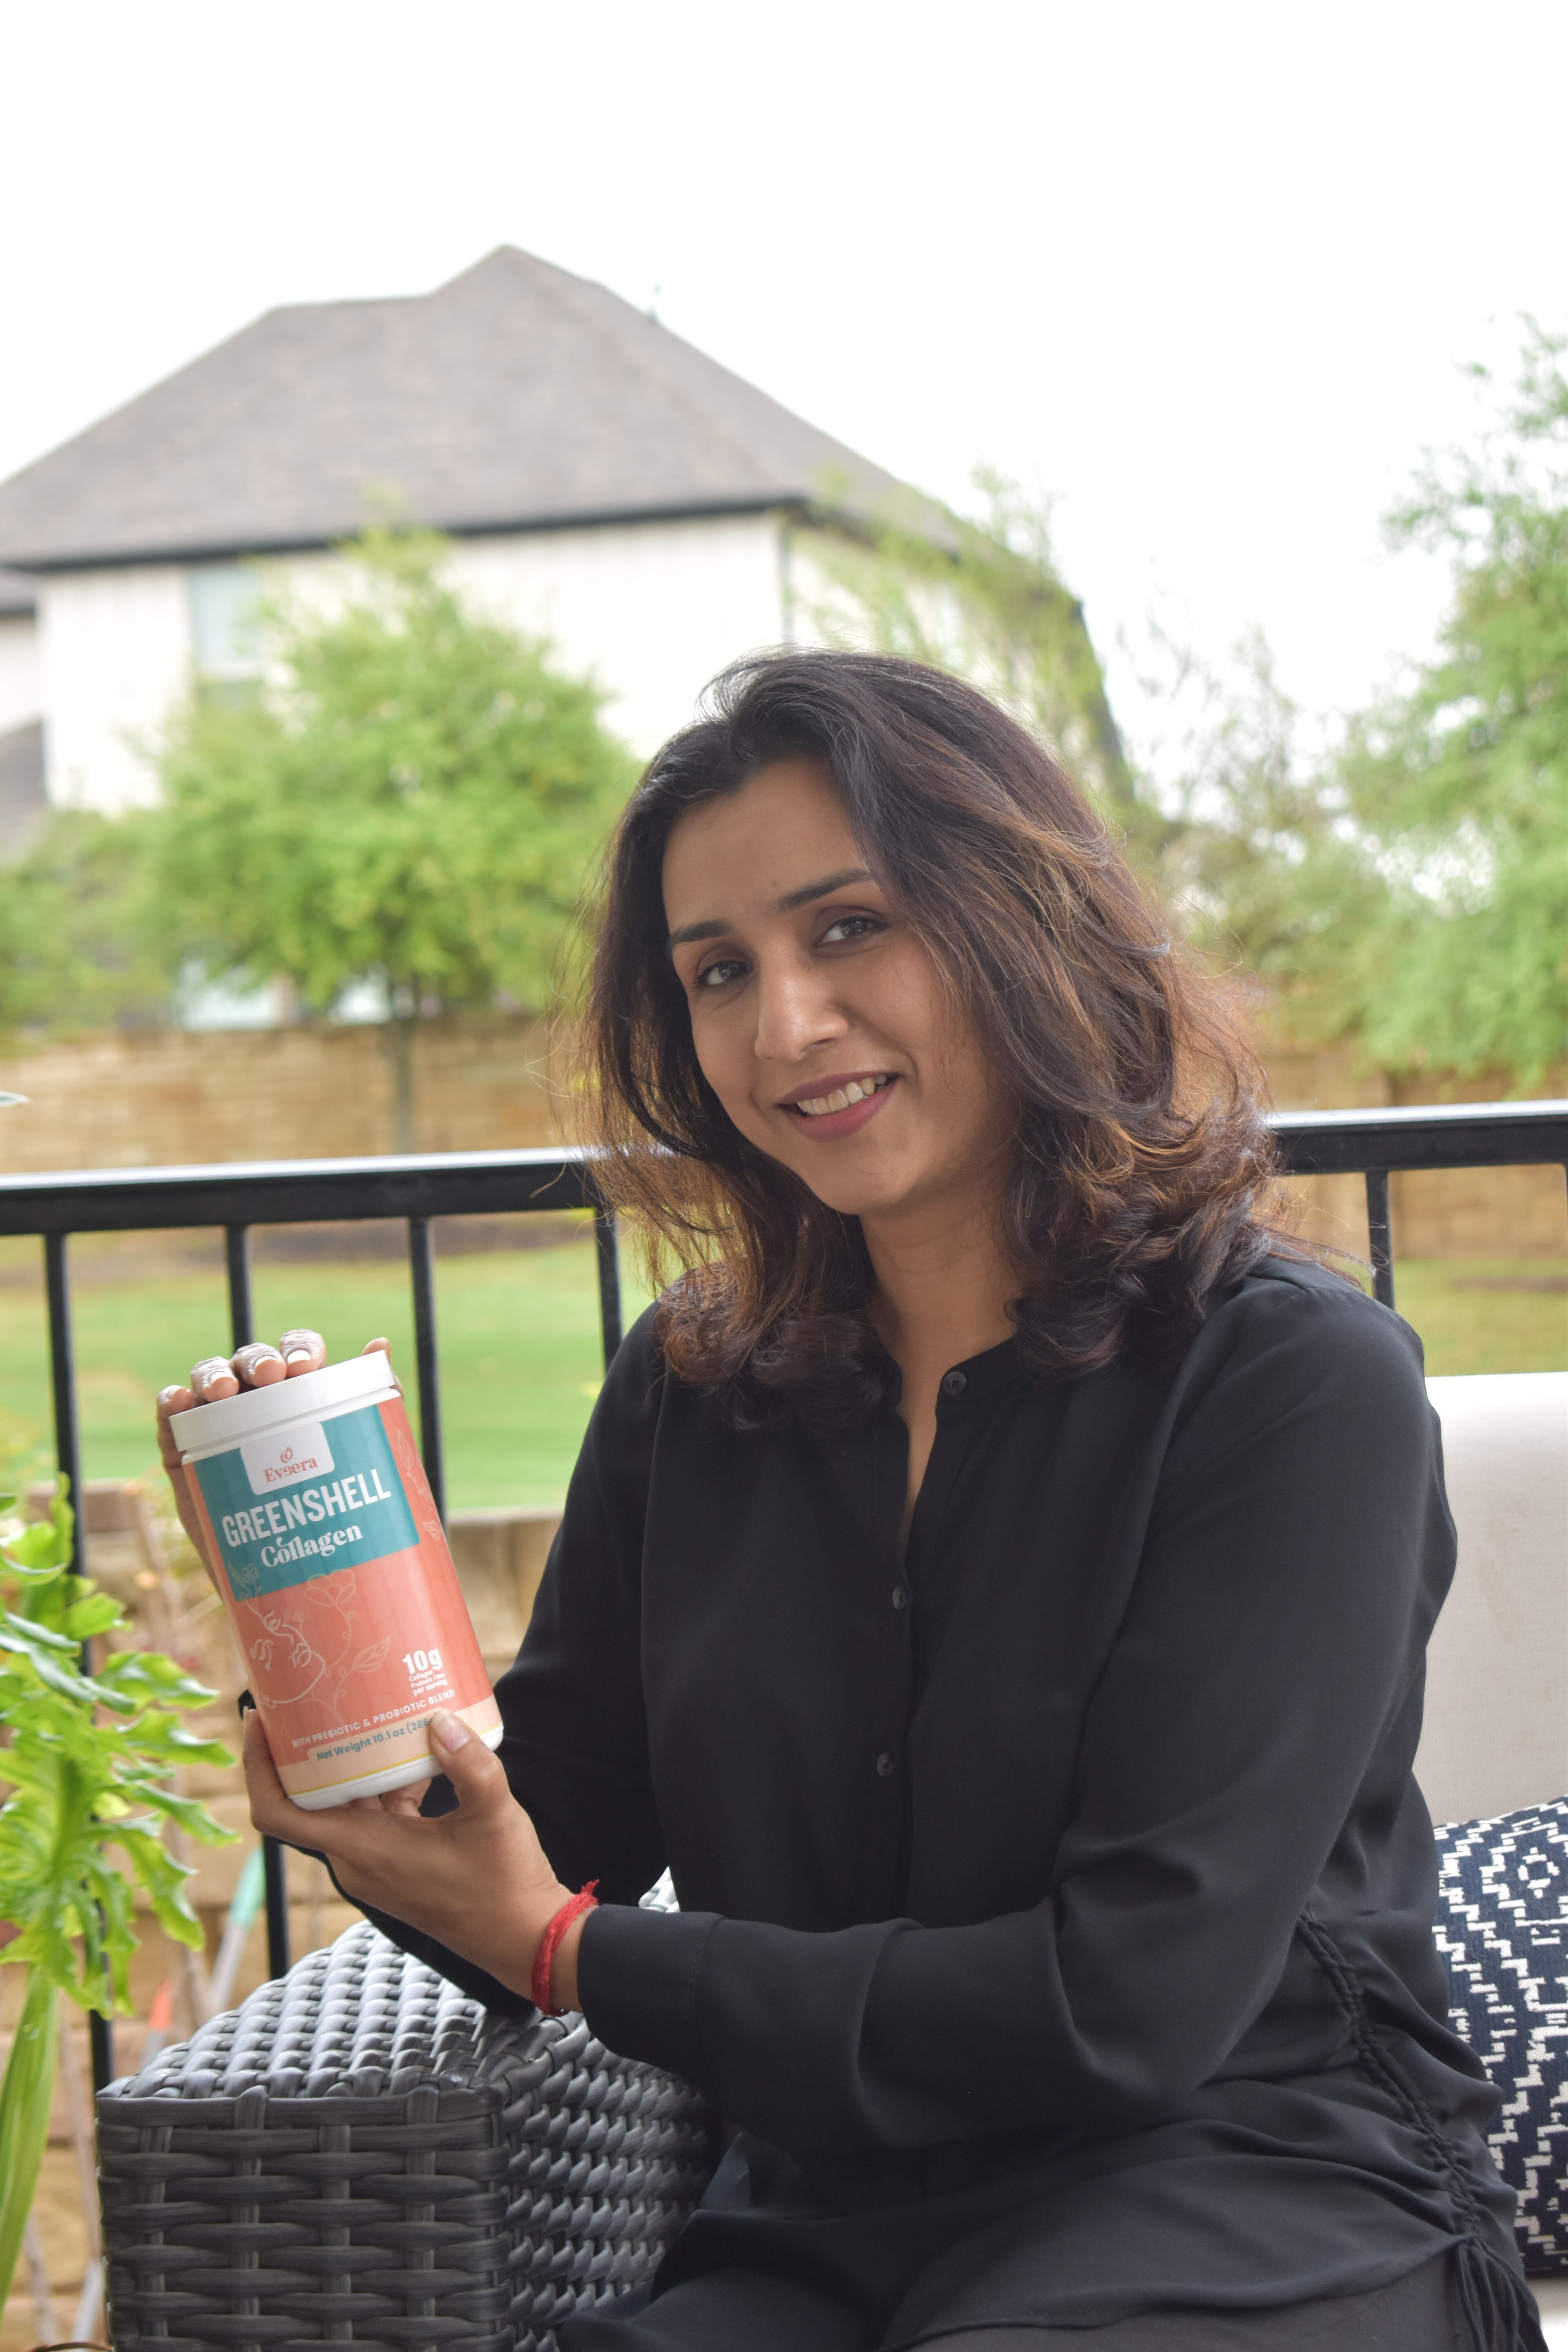 Smiling woman sitting outdoors holding a canister of greenshell collagen.